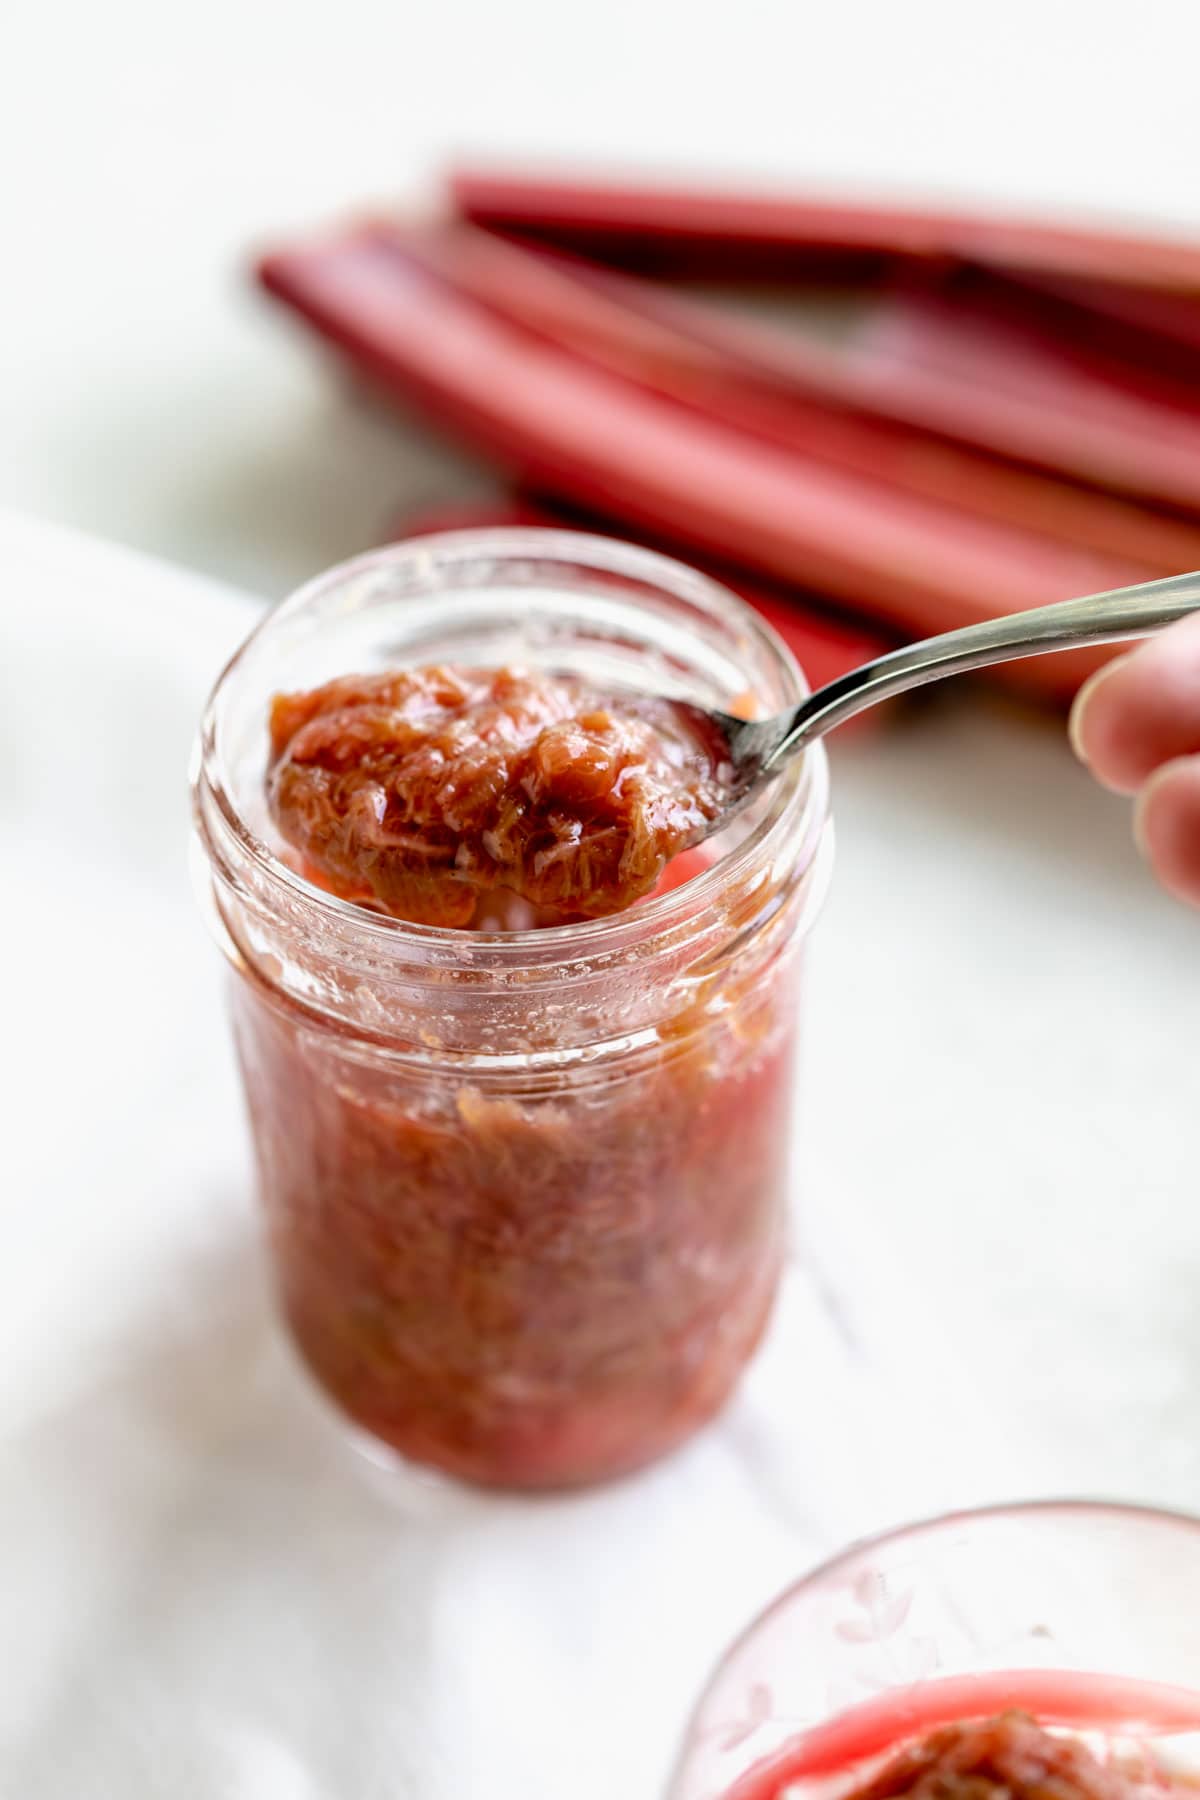 rhubarb compote in a jar with a spoon taking a scoop out